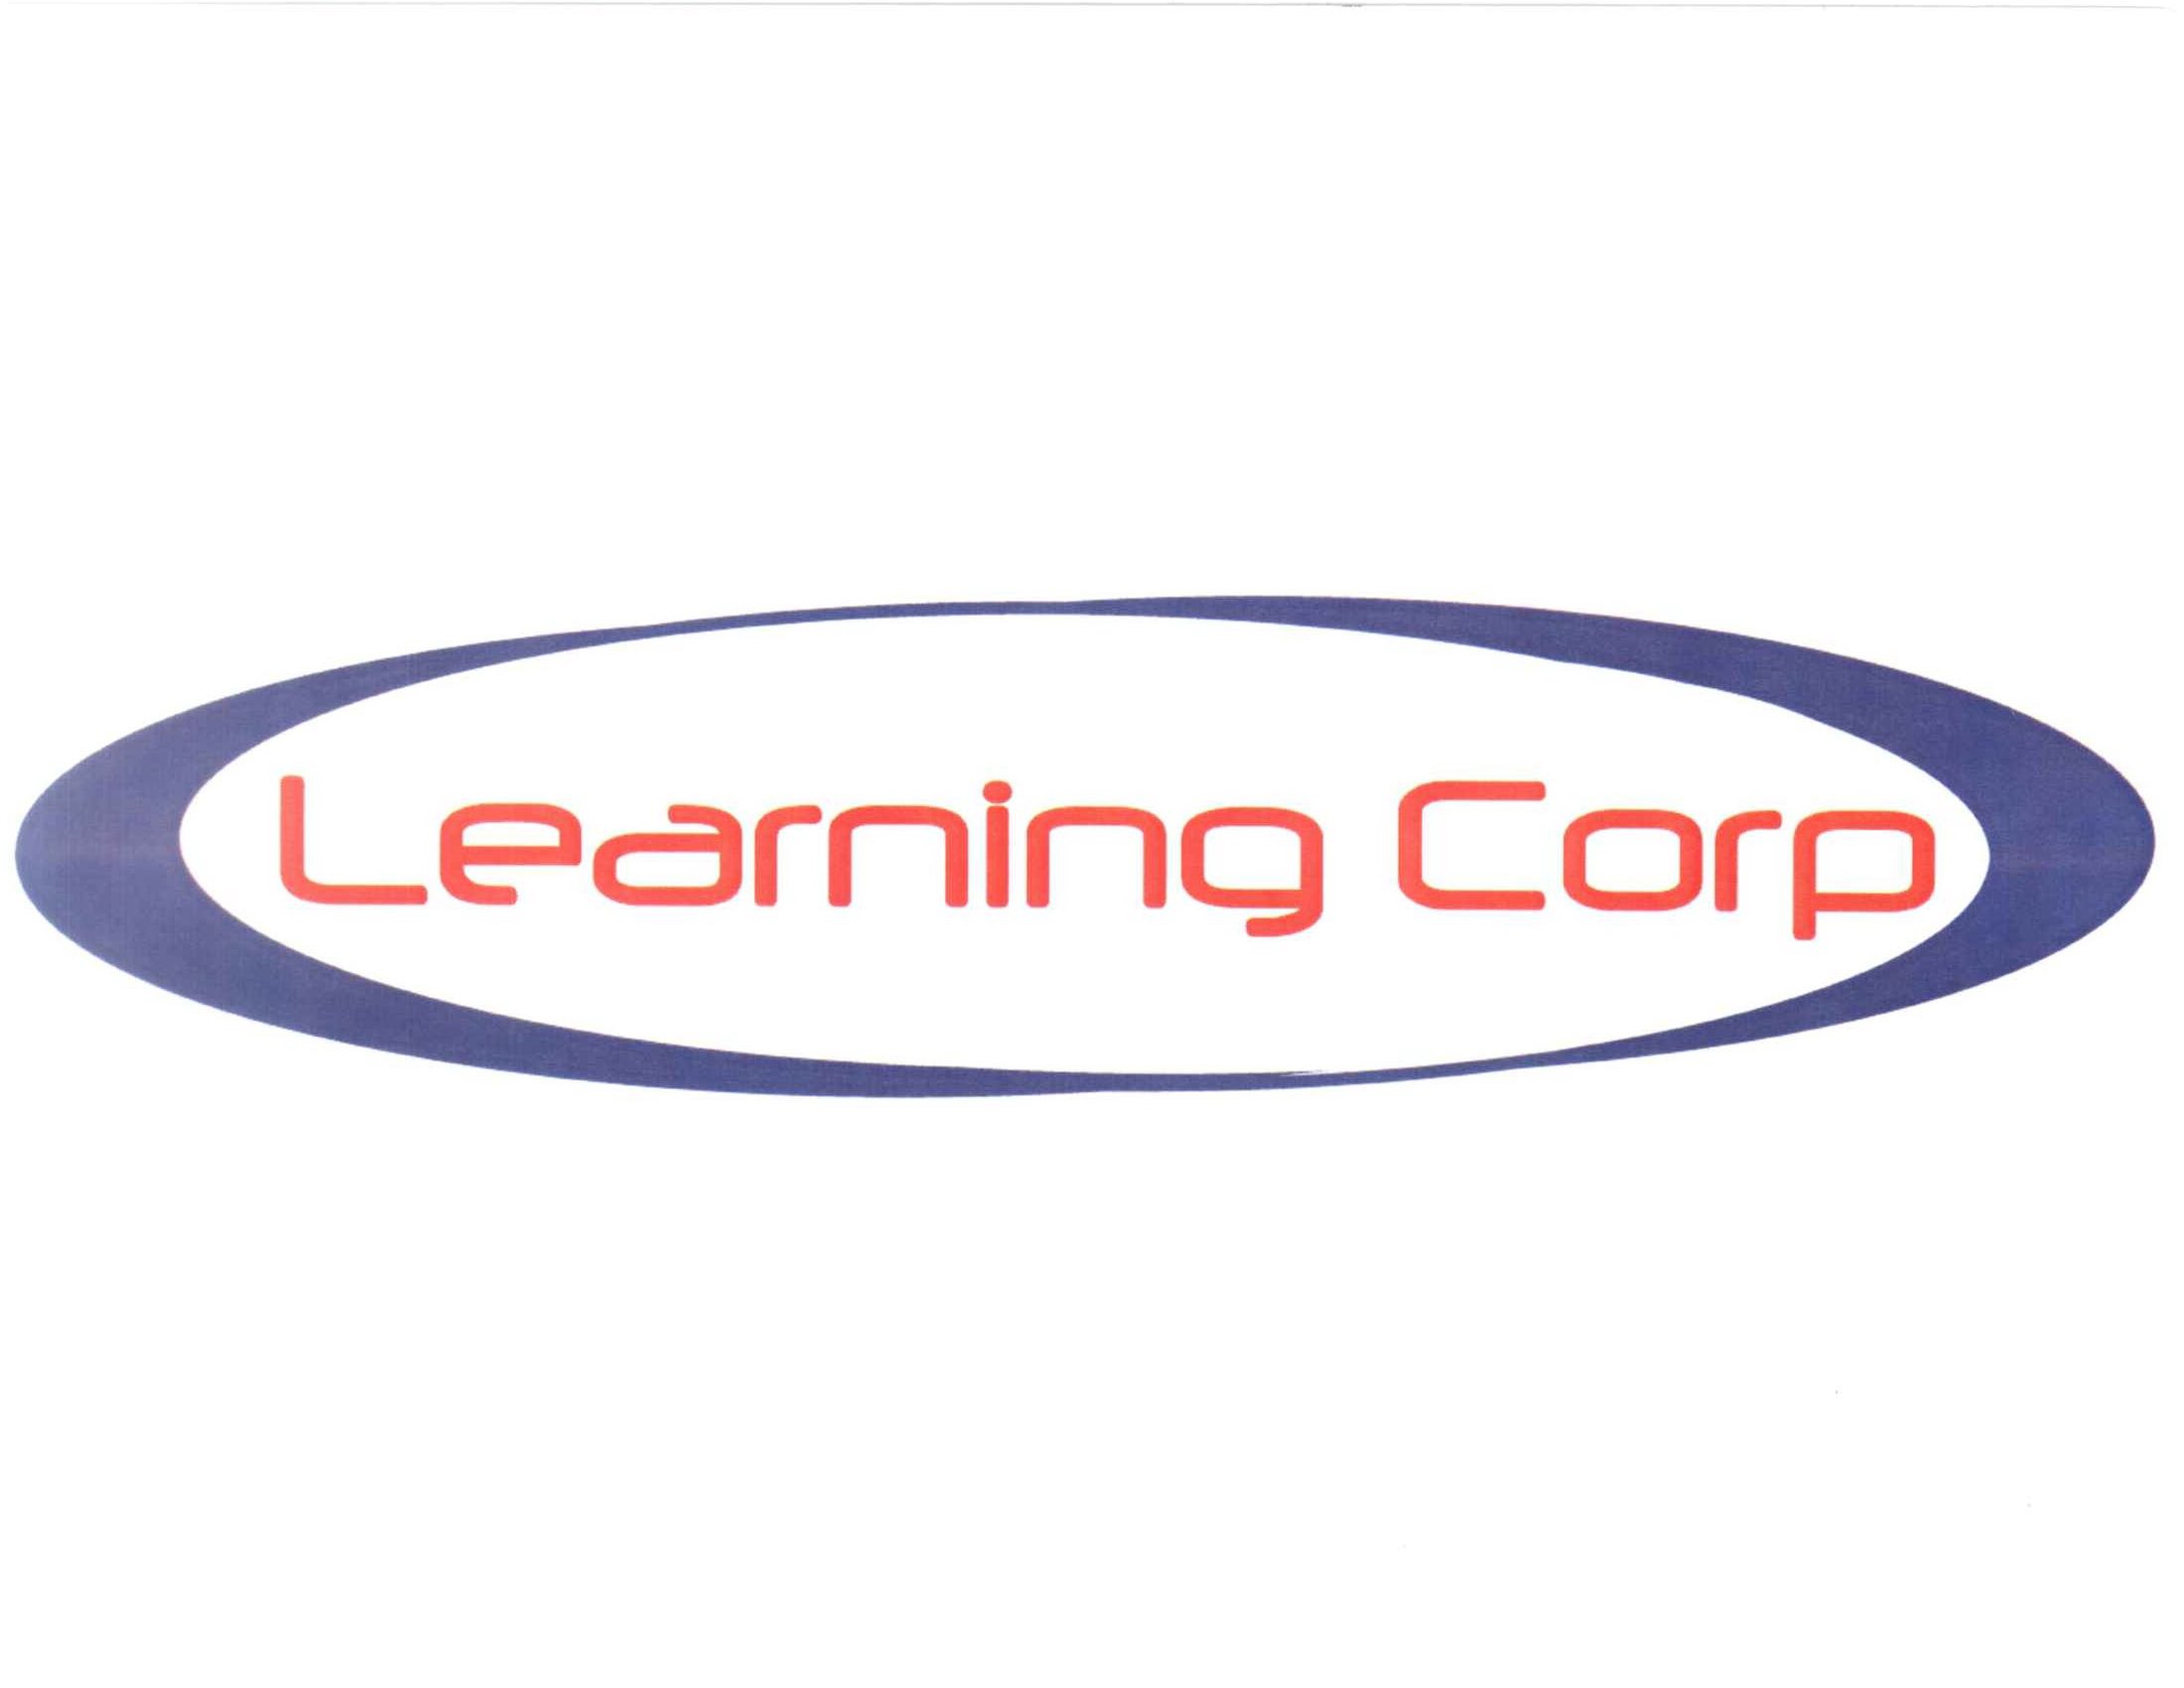  LEARNING CORP